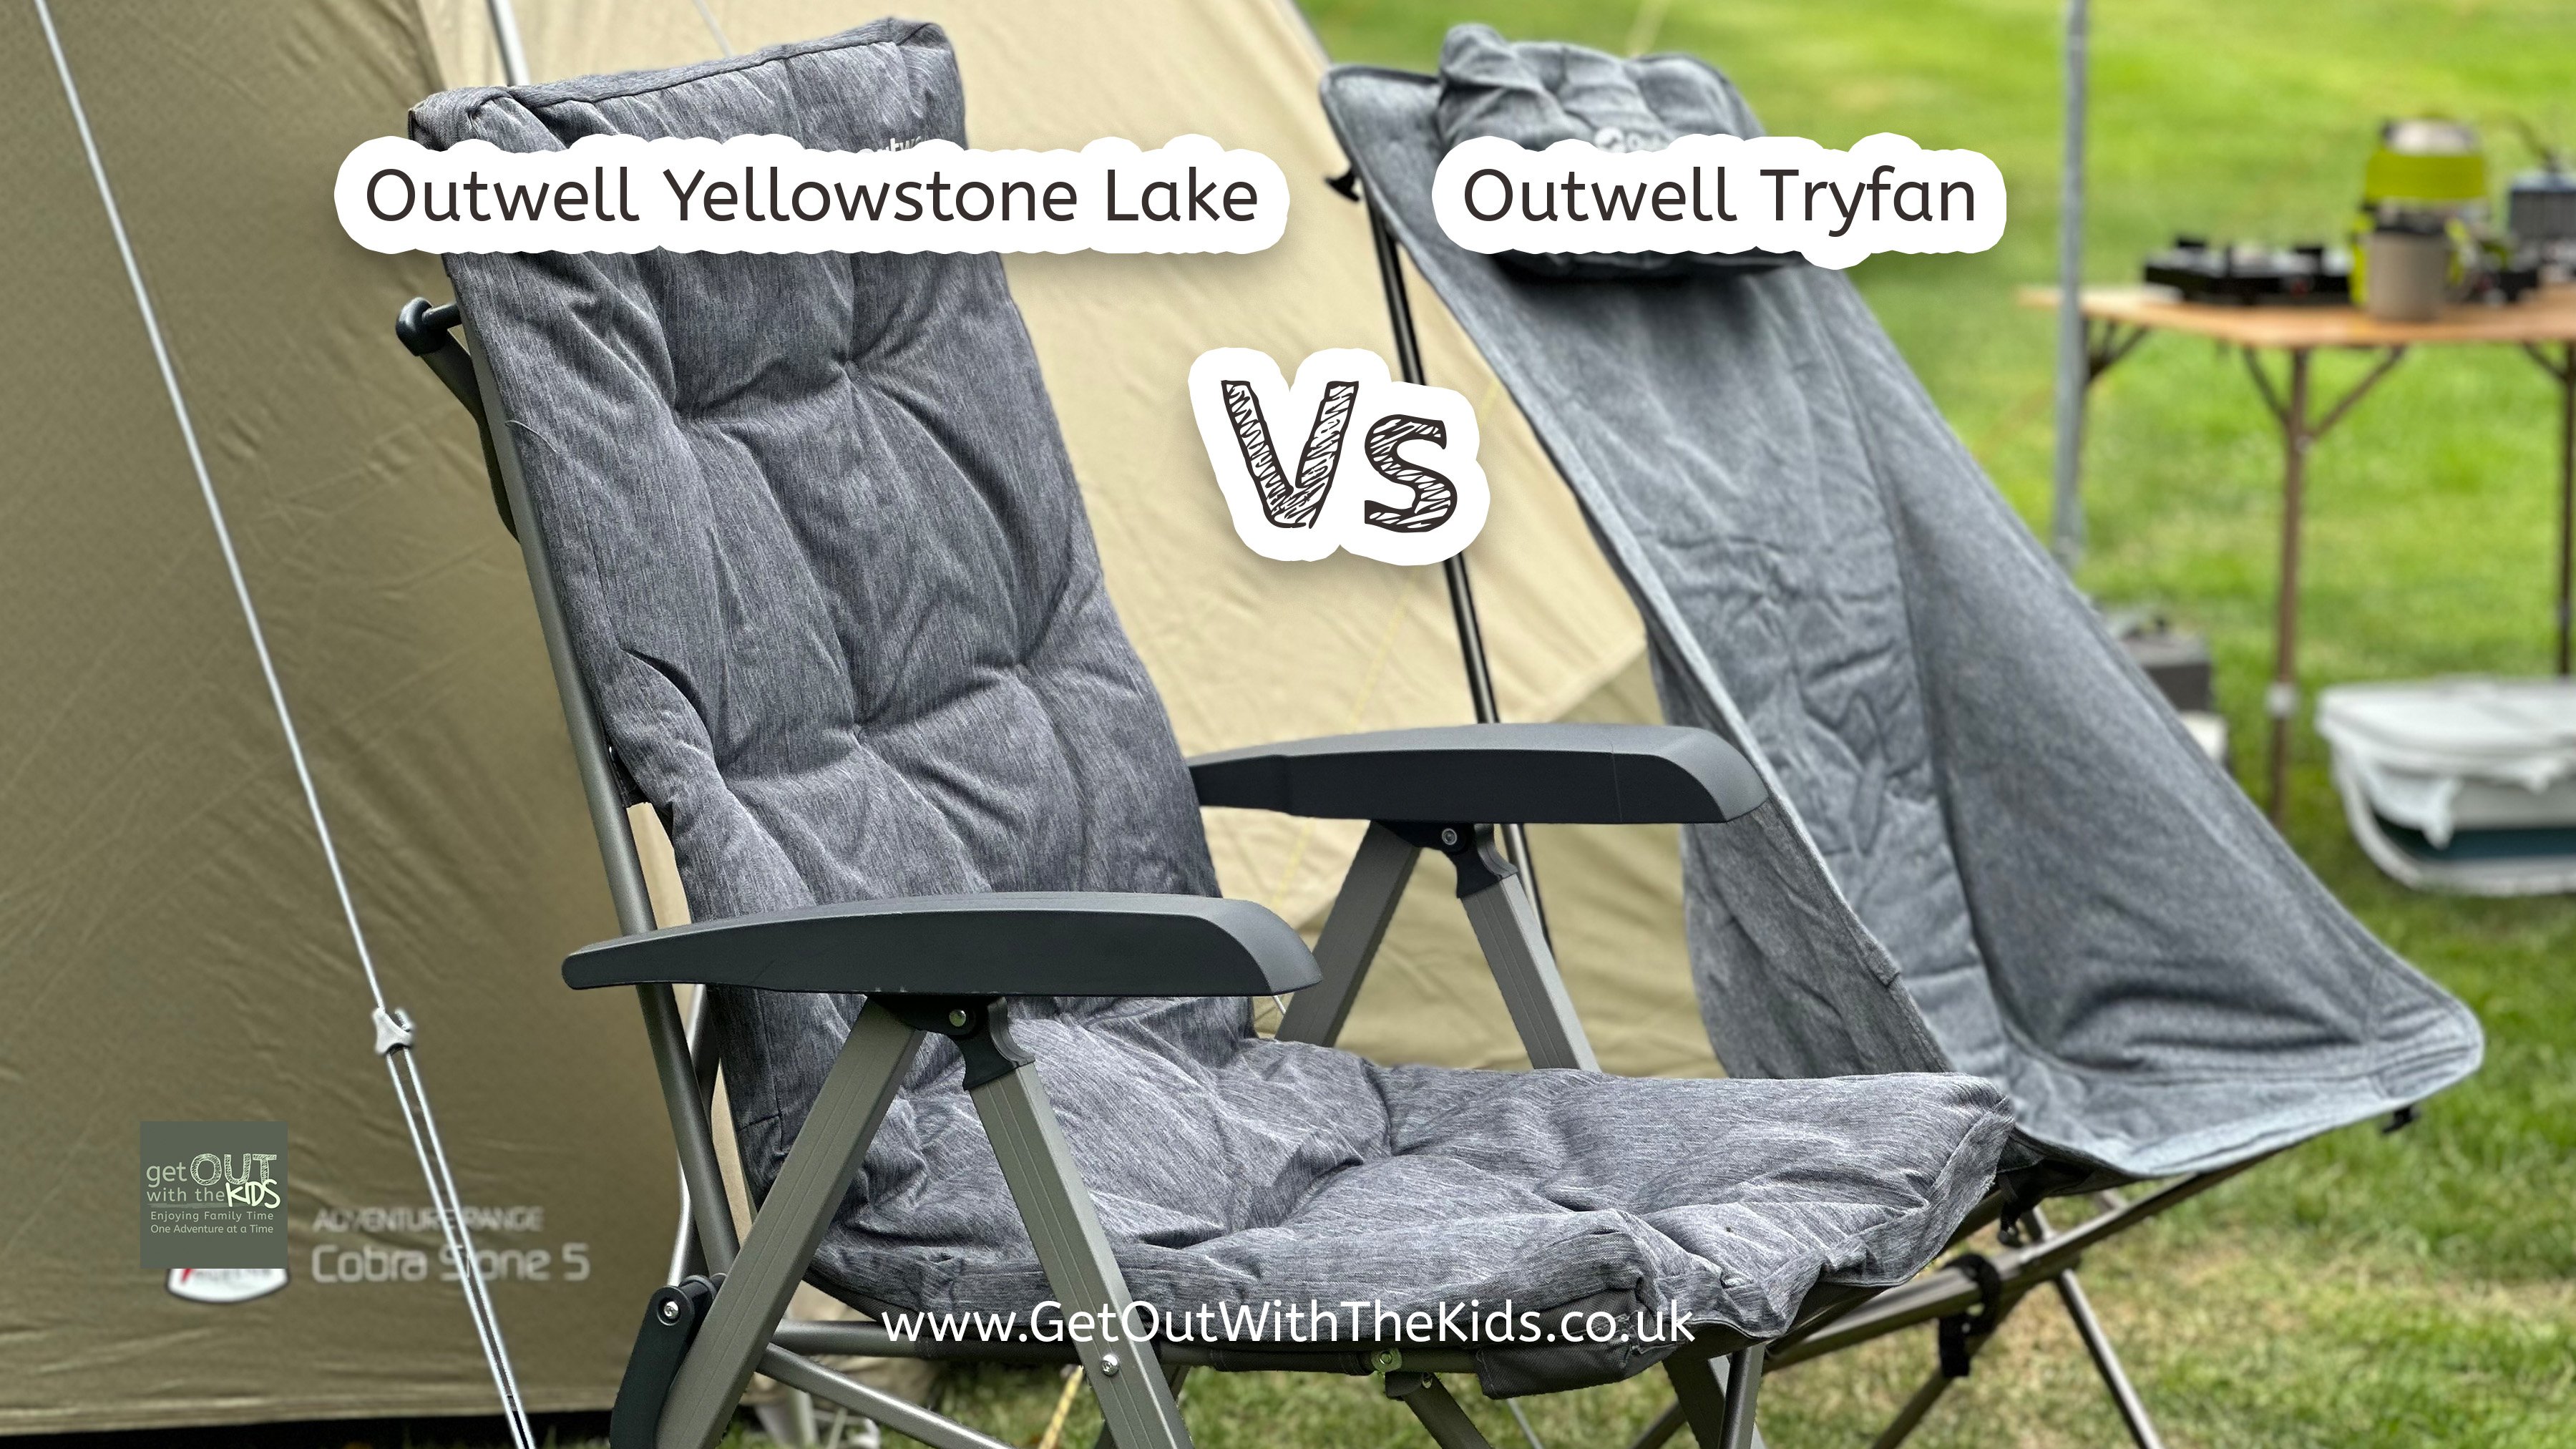 Outwell Yellowstone Lake and Outwell Tryfan Chairs next to each other